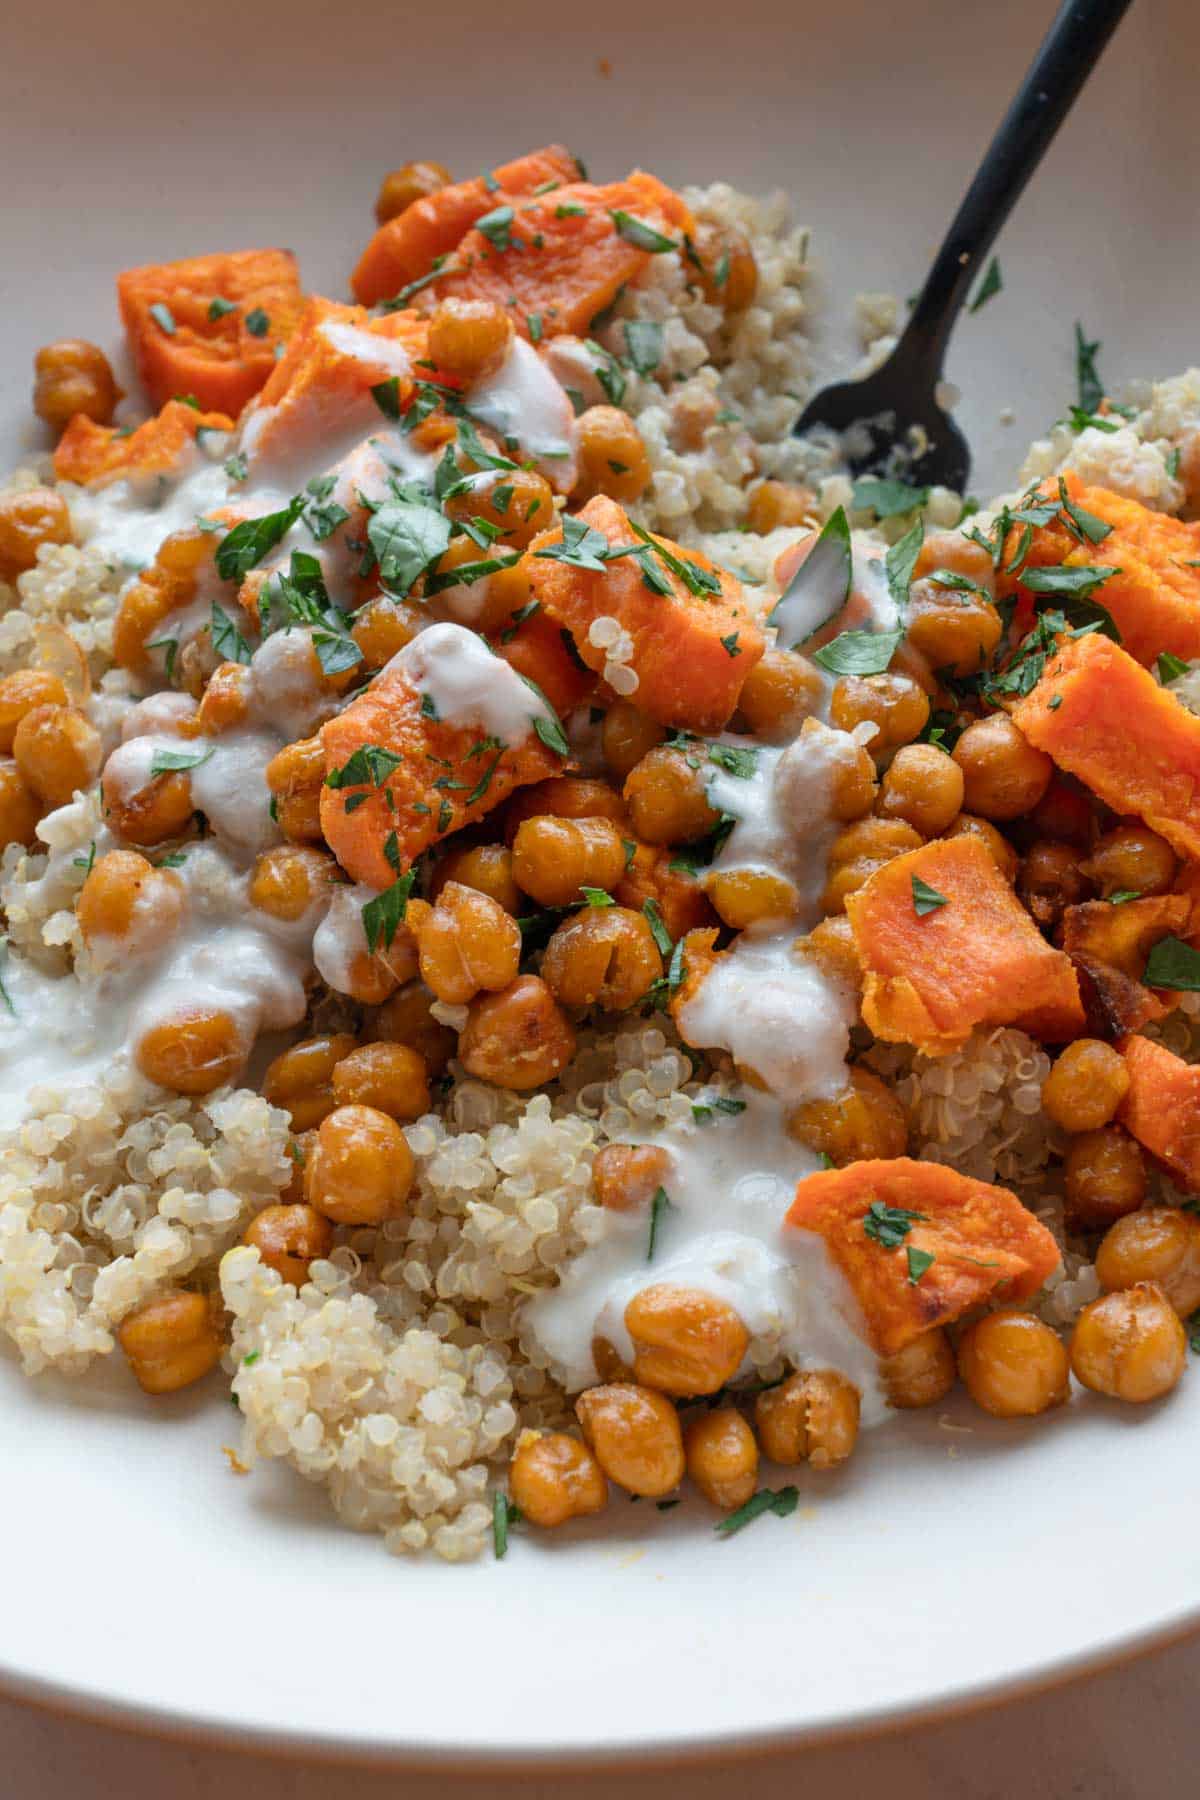 Sweet potato, roasted chickpeas, quinoa, white creamy garlic sauce, and a chopped parsley garnish with a black fork.